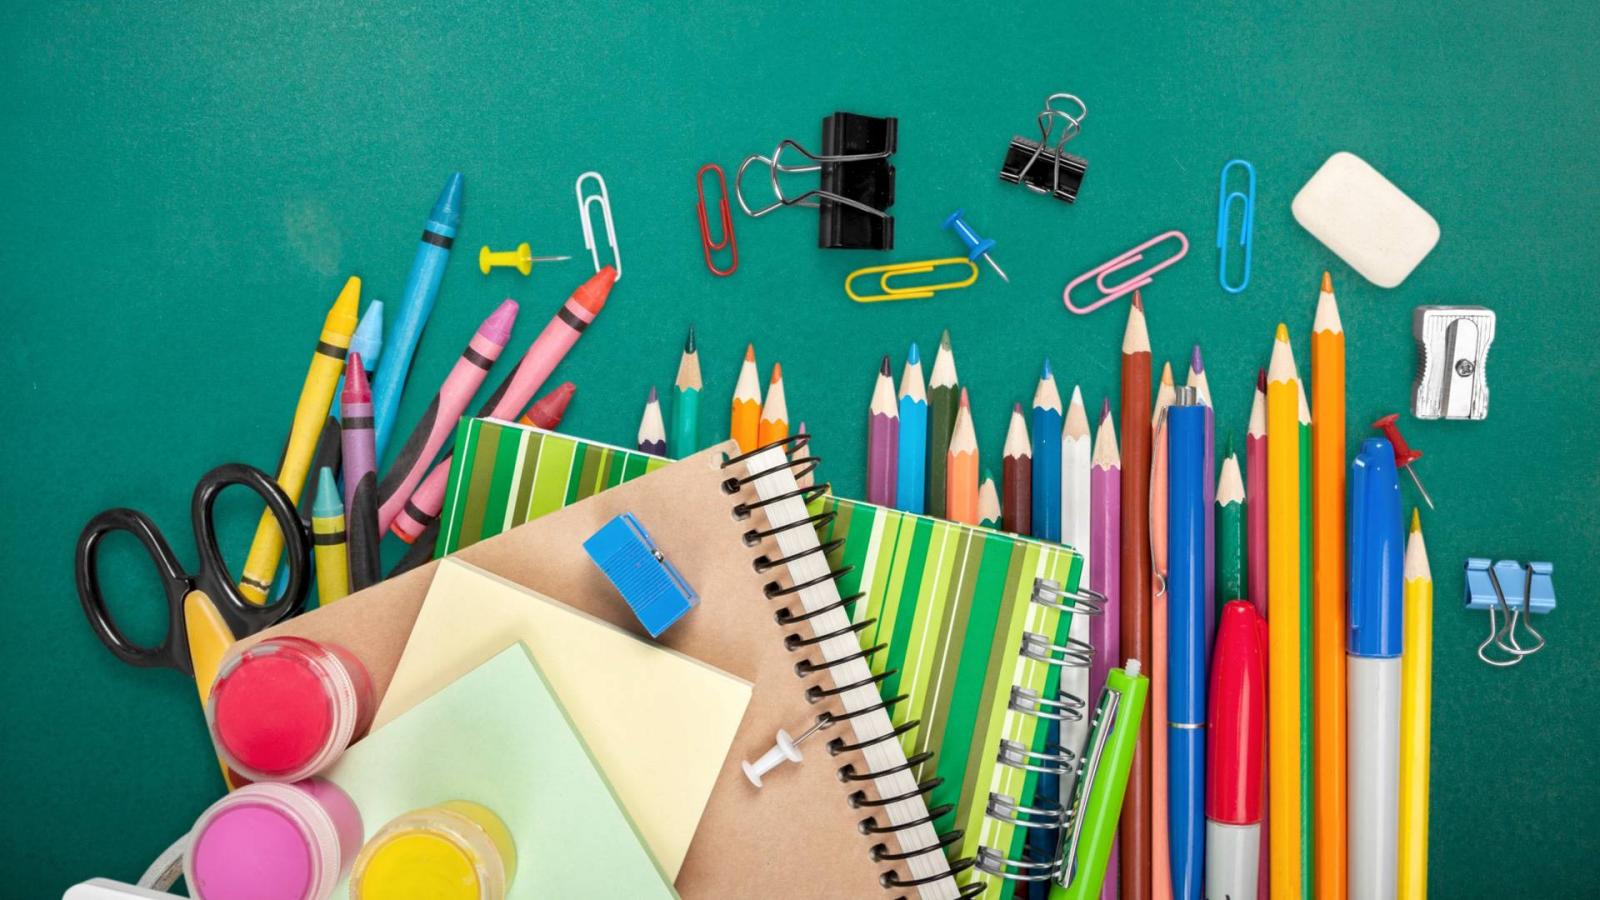 👩🏻‍🏫 Can You Survive a Day as a High School Teacher? Stationery